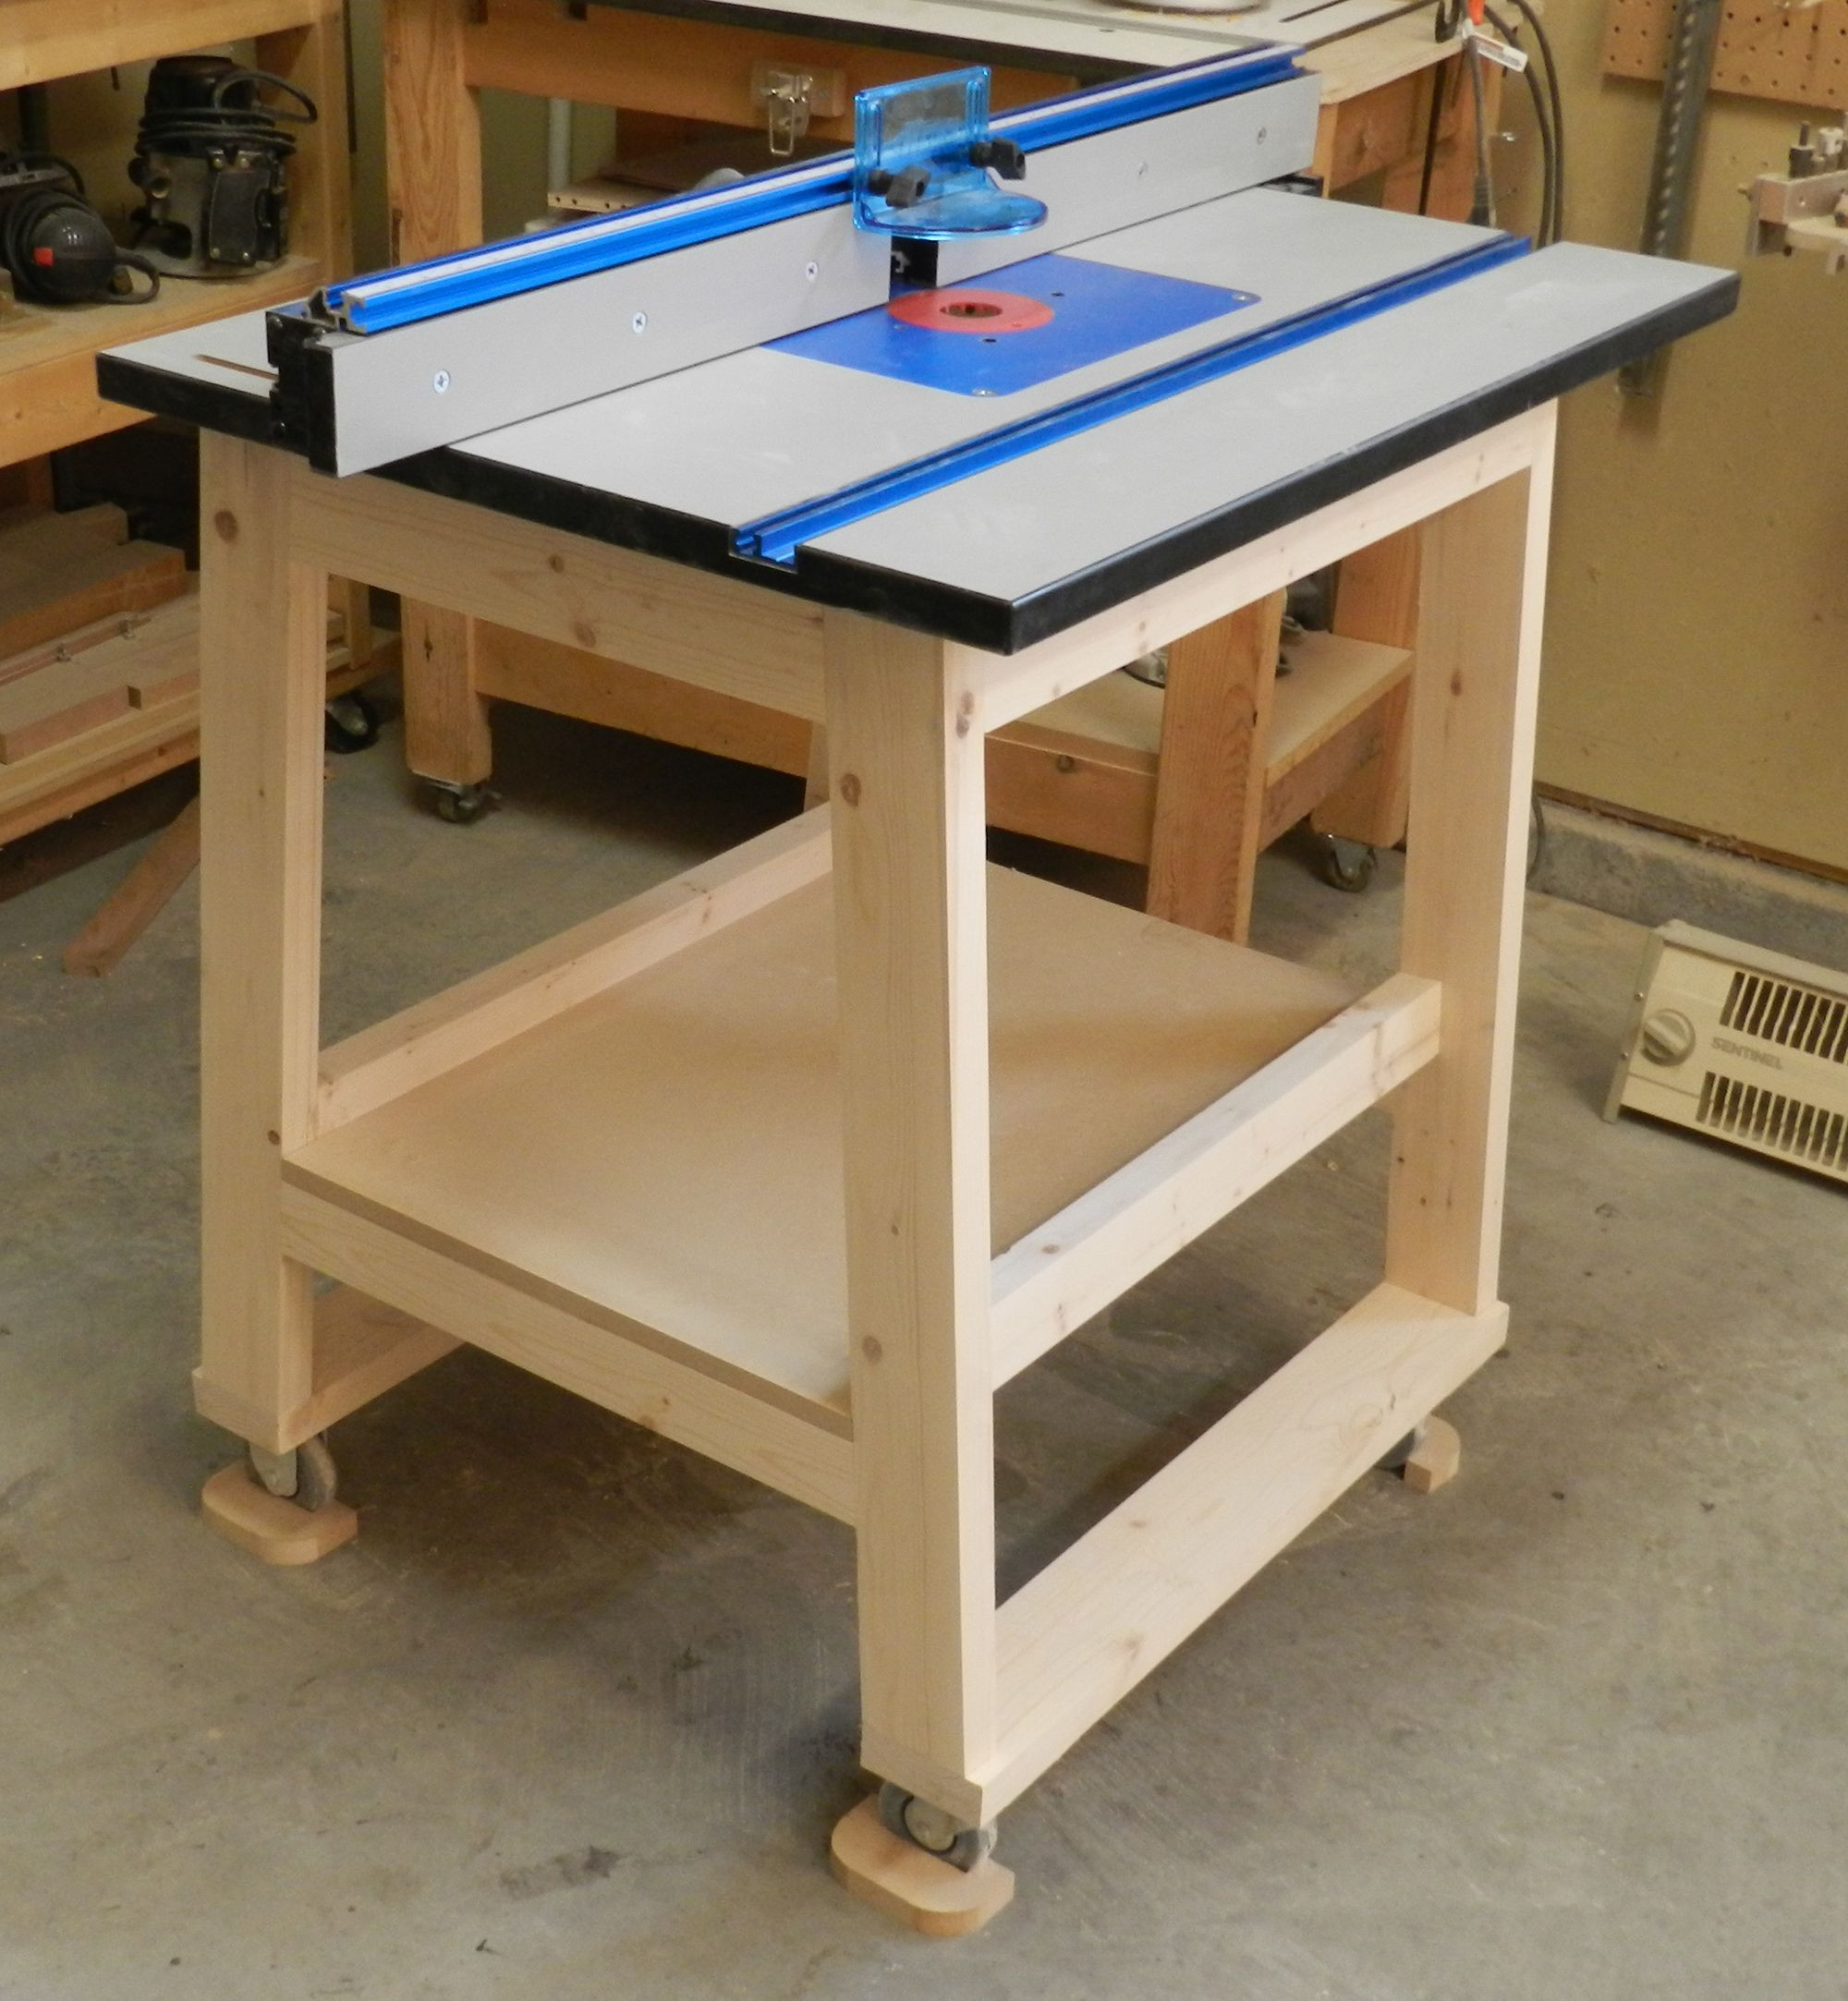 Improve your repair and restoration skills with this DIY router table